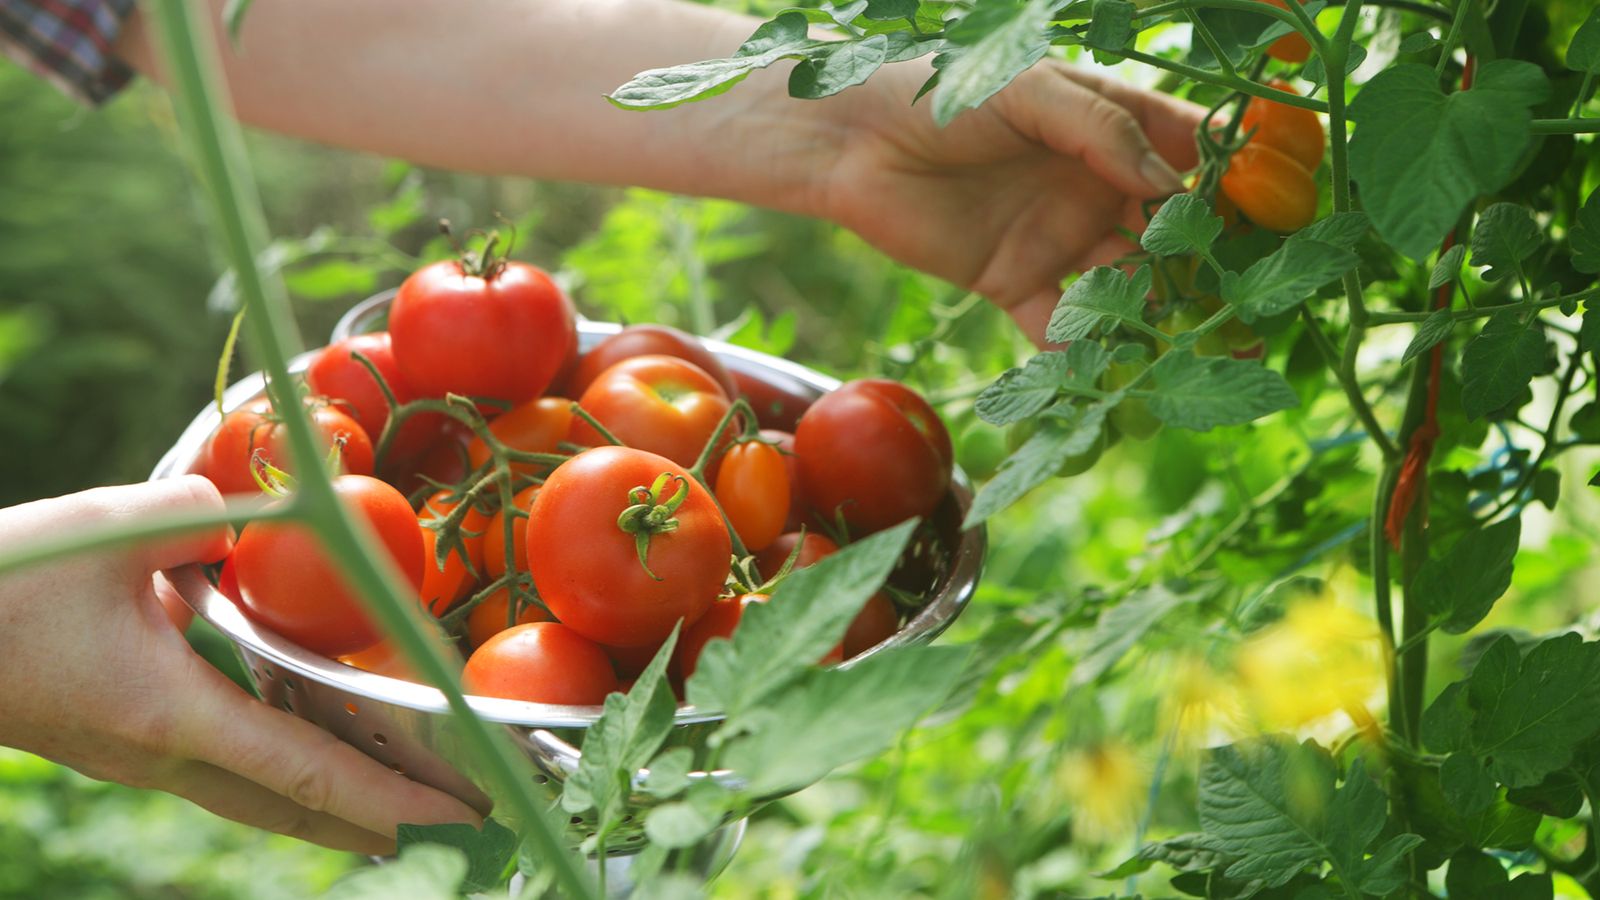 When to plant tomatoes: for a bumper crop